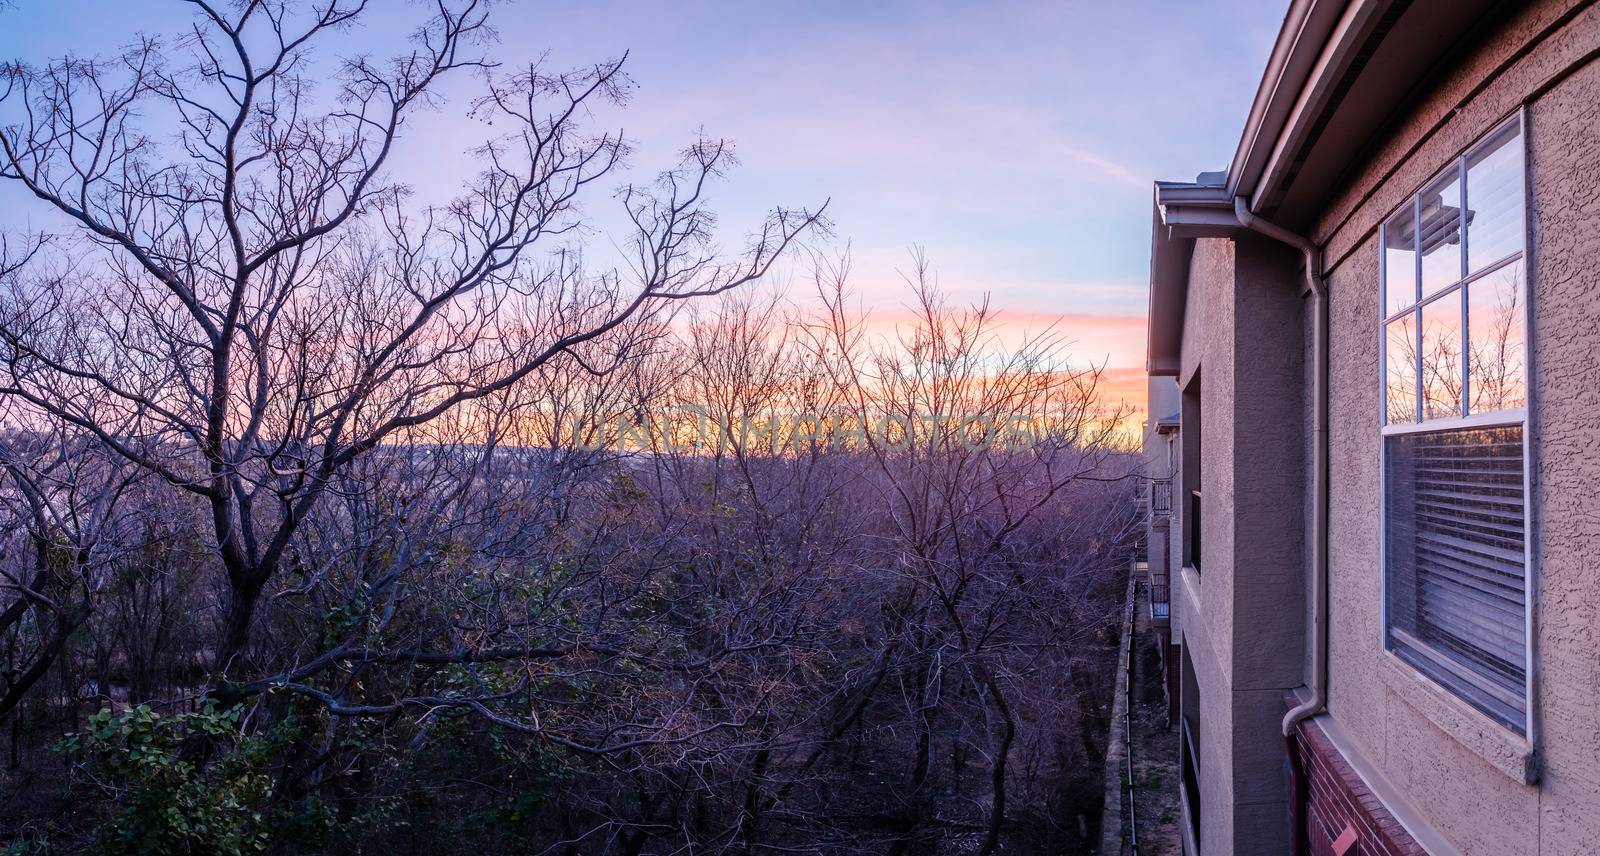 Panoramic aerial view of apartment complex near forest with bare trees during wintertime sunrise by trongnguyen